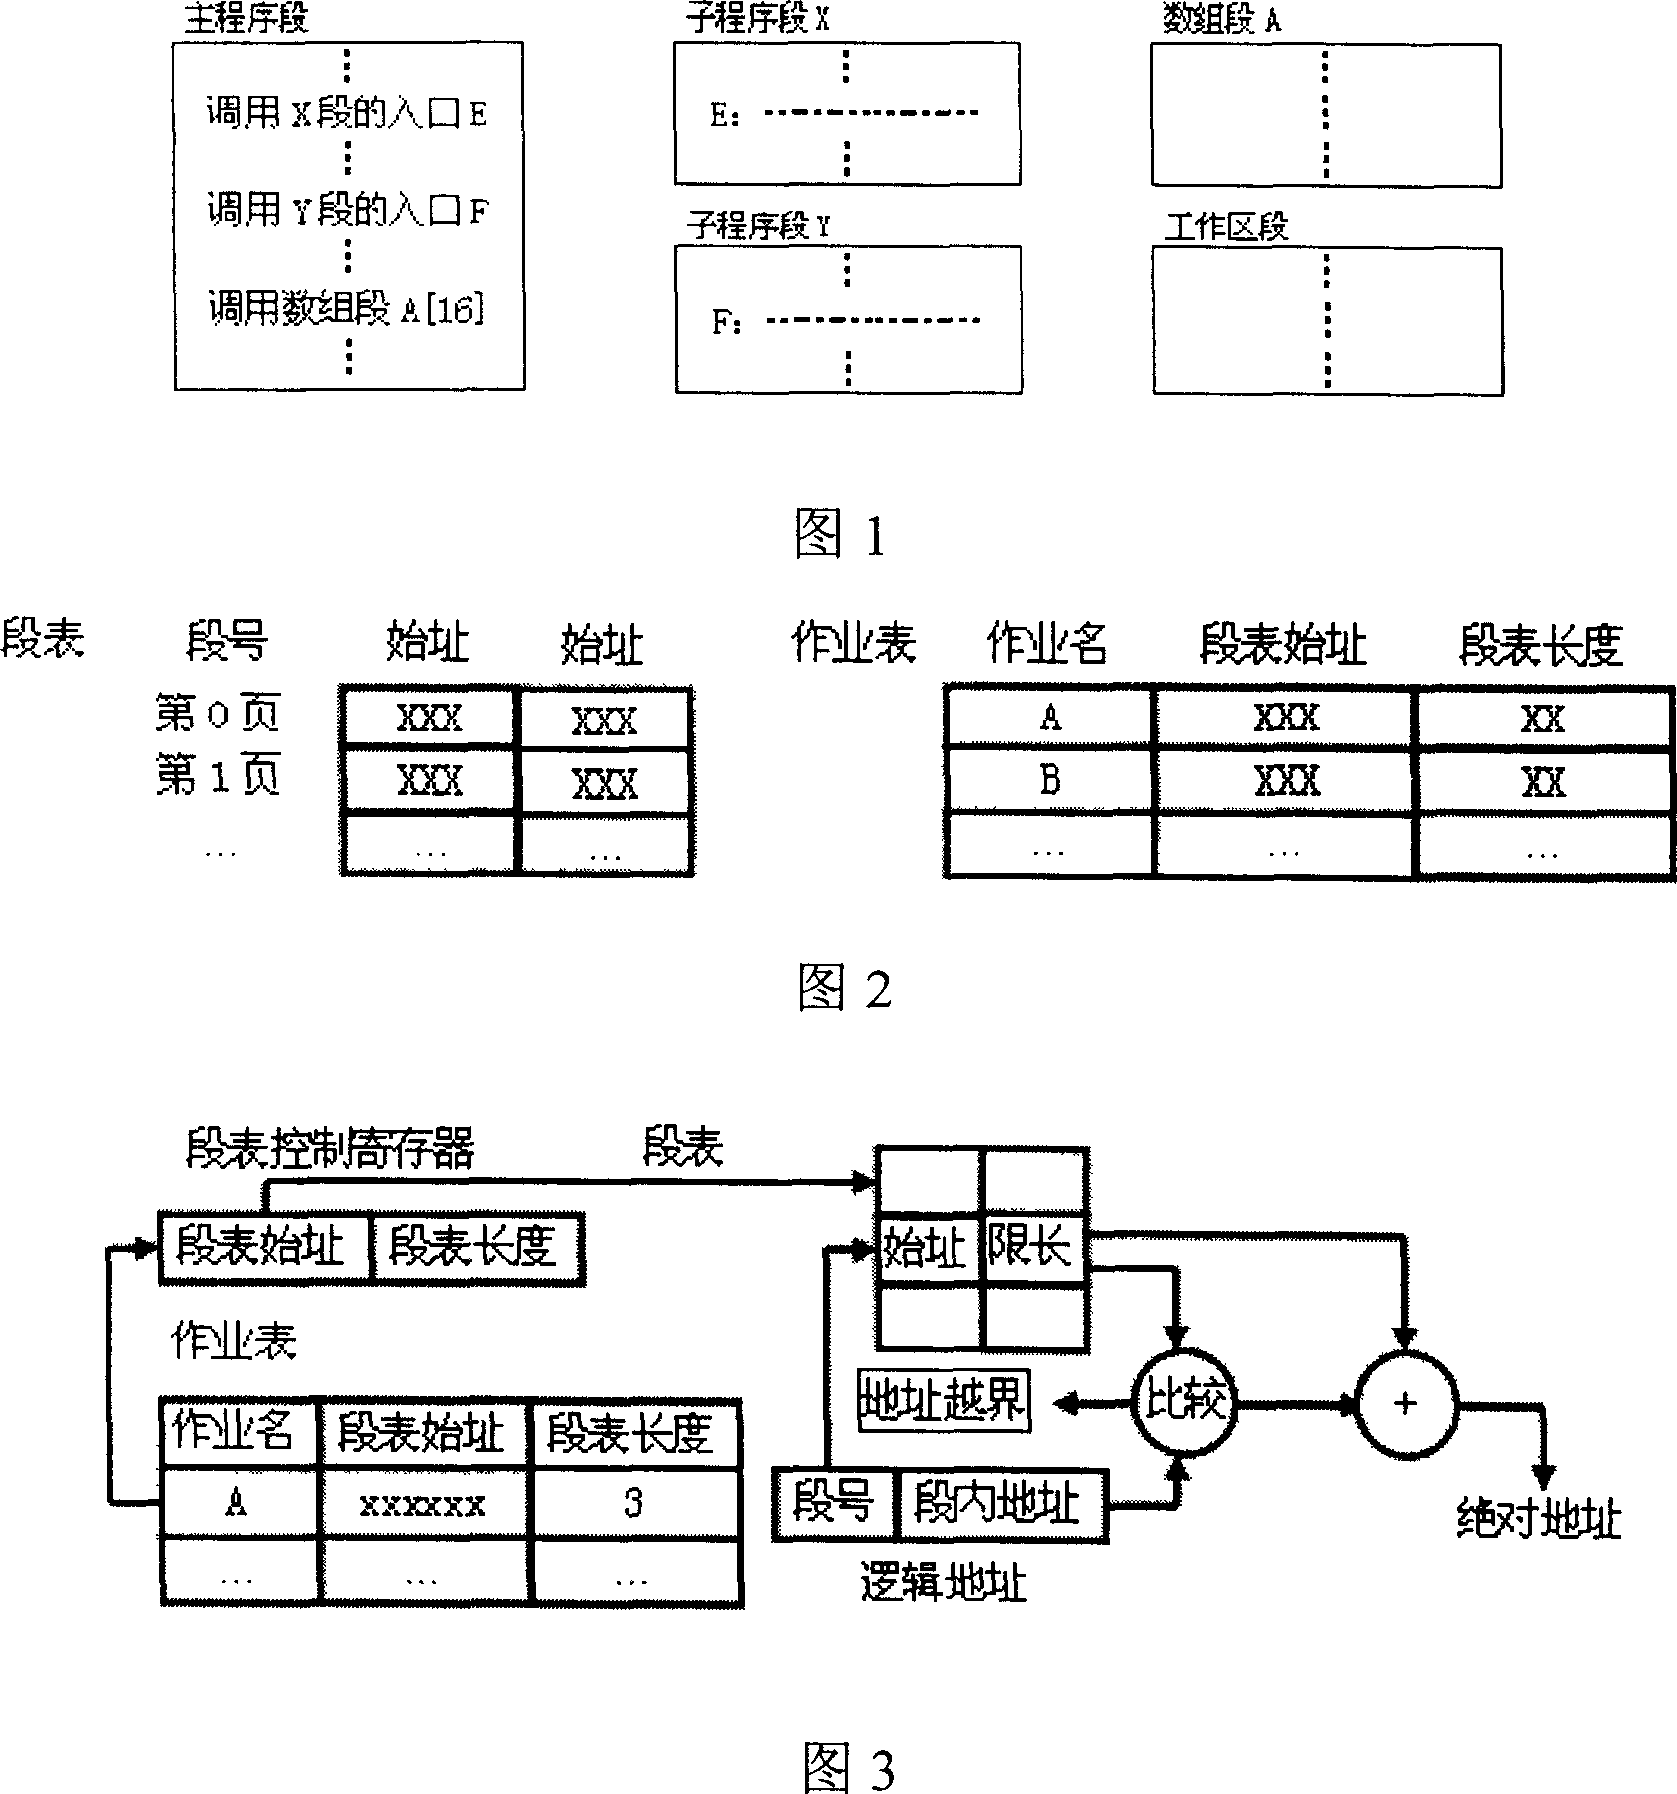 Segmentation and paging data storage space management method facing heterogeneous polynuclear system